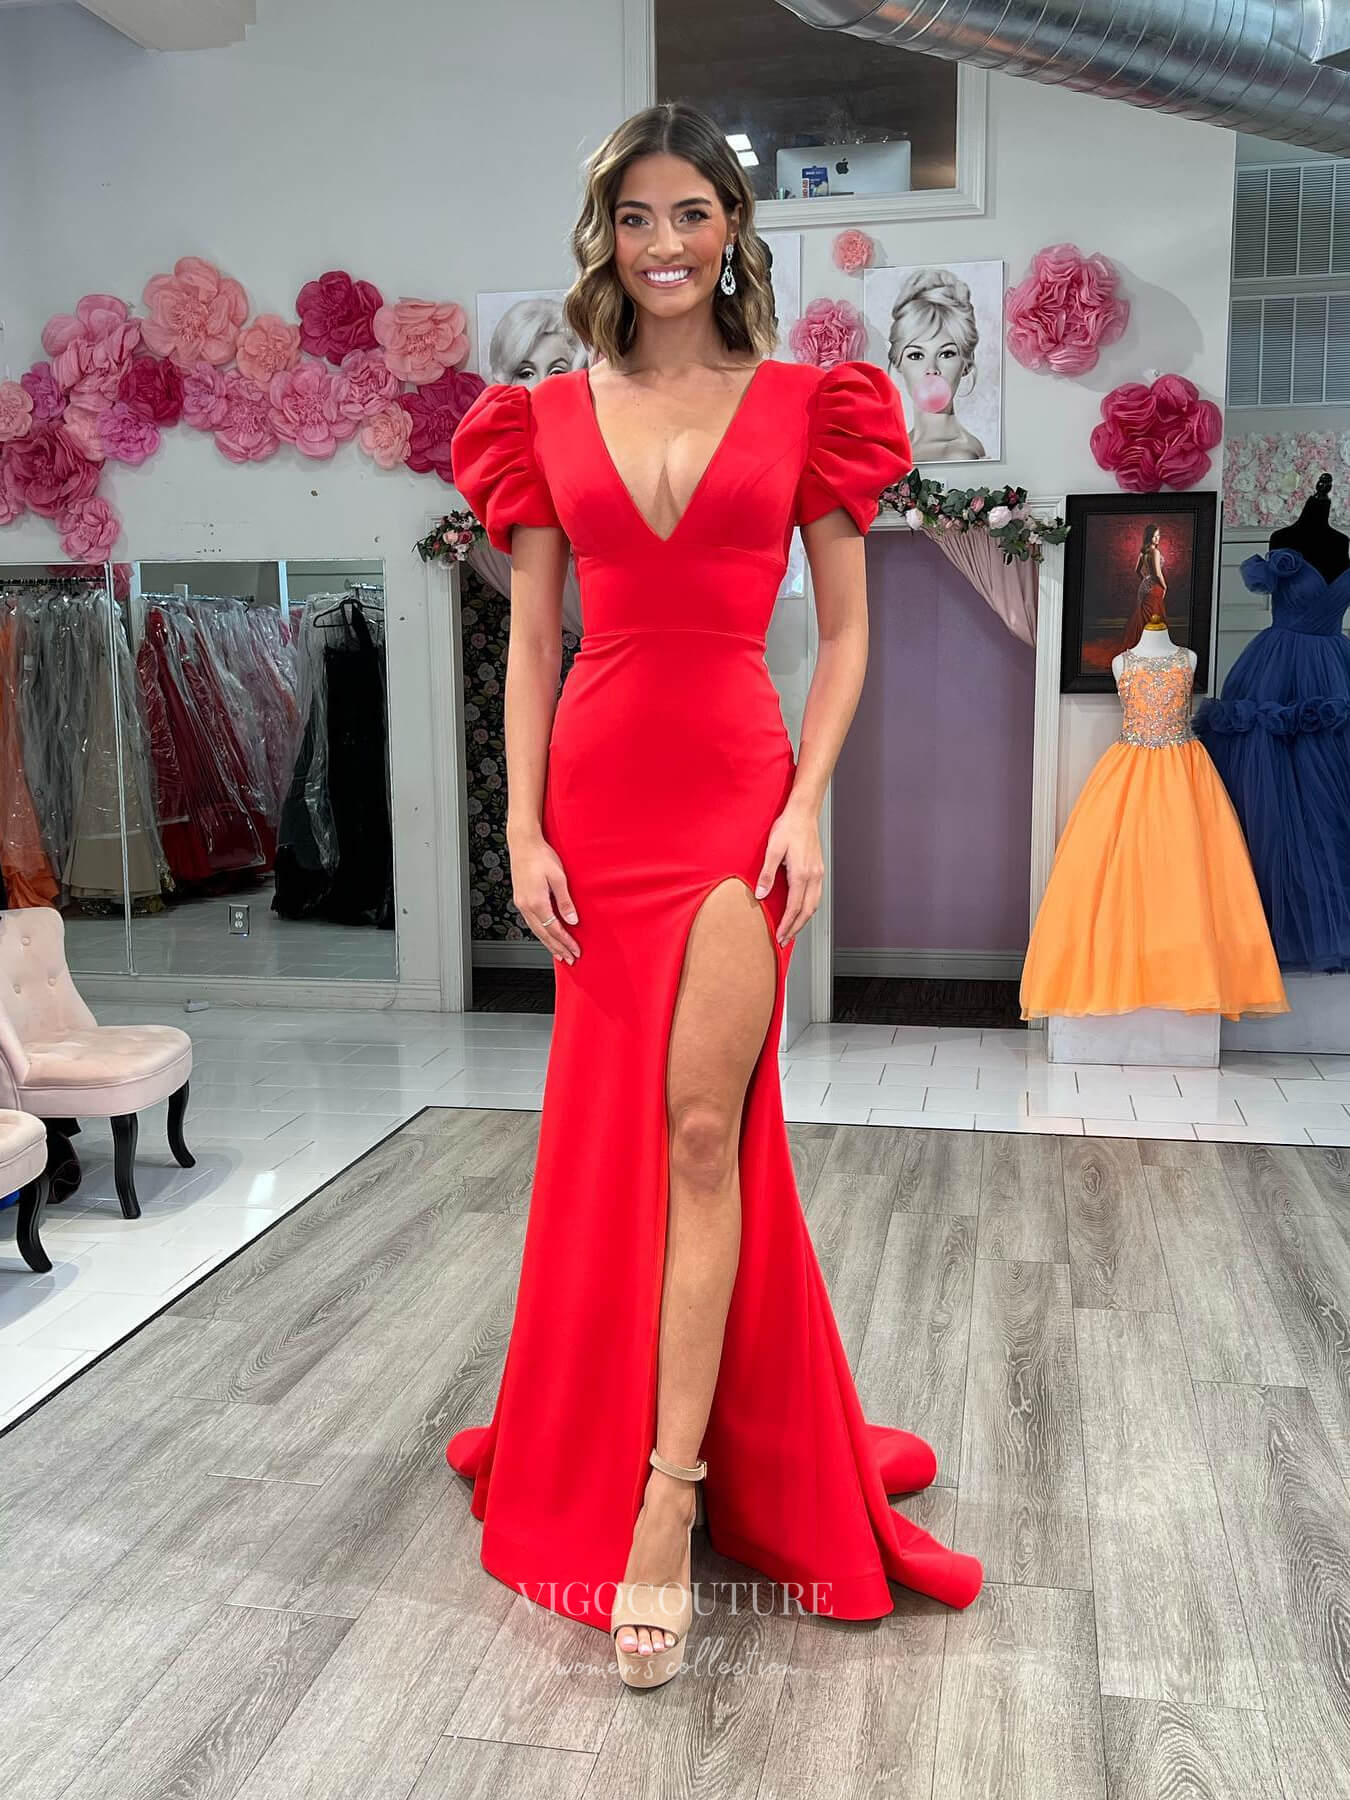 Red Puffed Sleeve Satin Mermaid Prom Dresses with Slit V-Neck 24162-Prom Dresses-vigocouture-Red-Custom Size-vigocouture